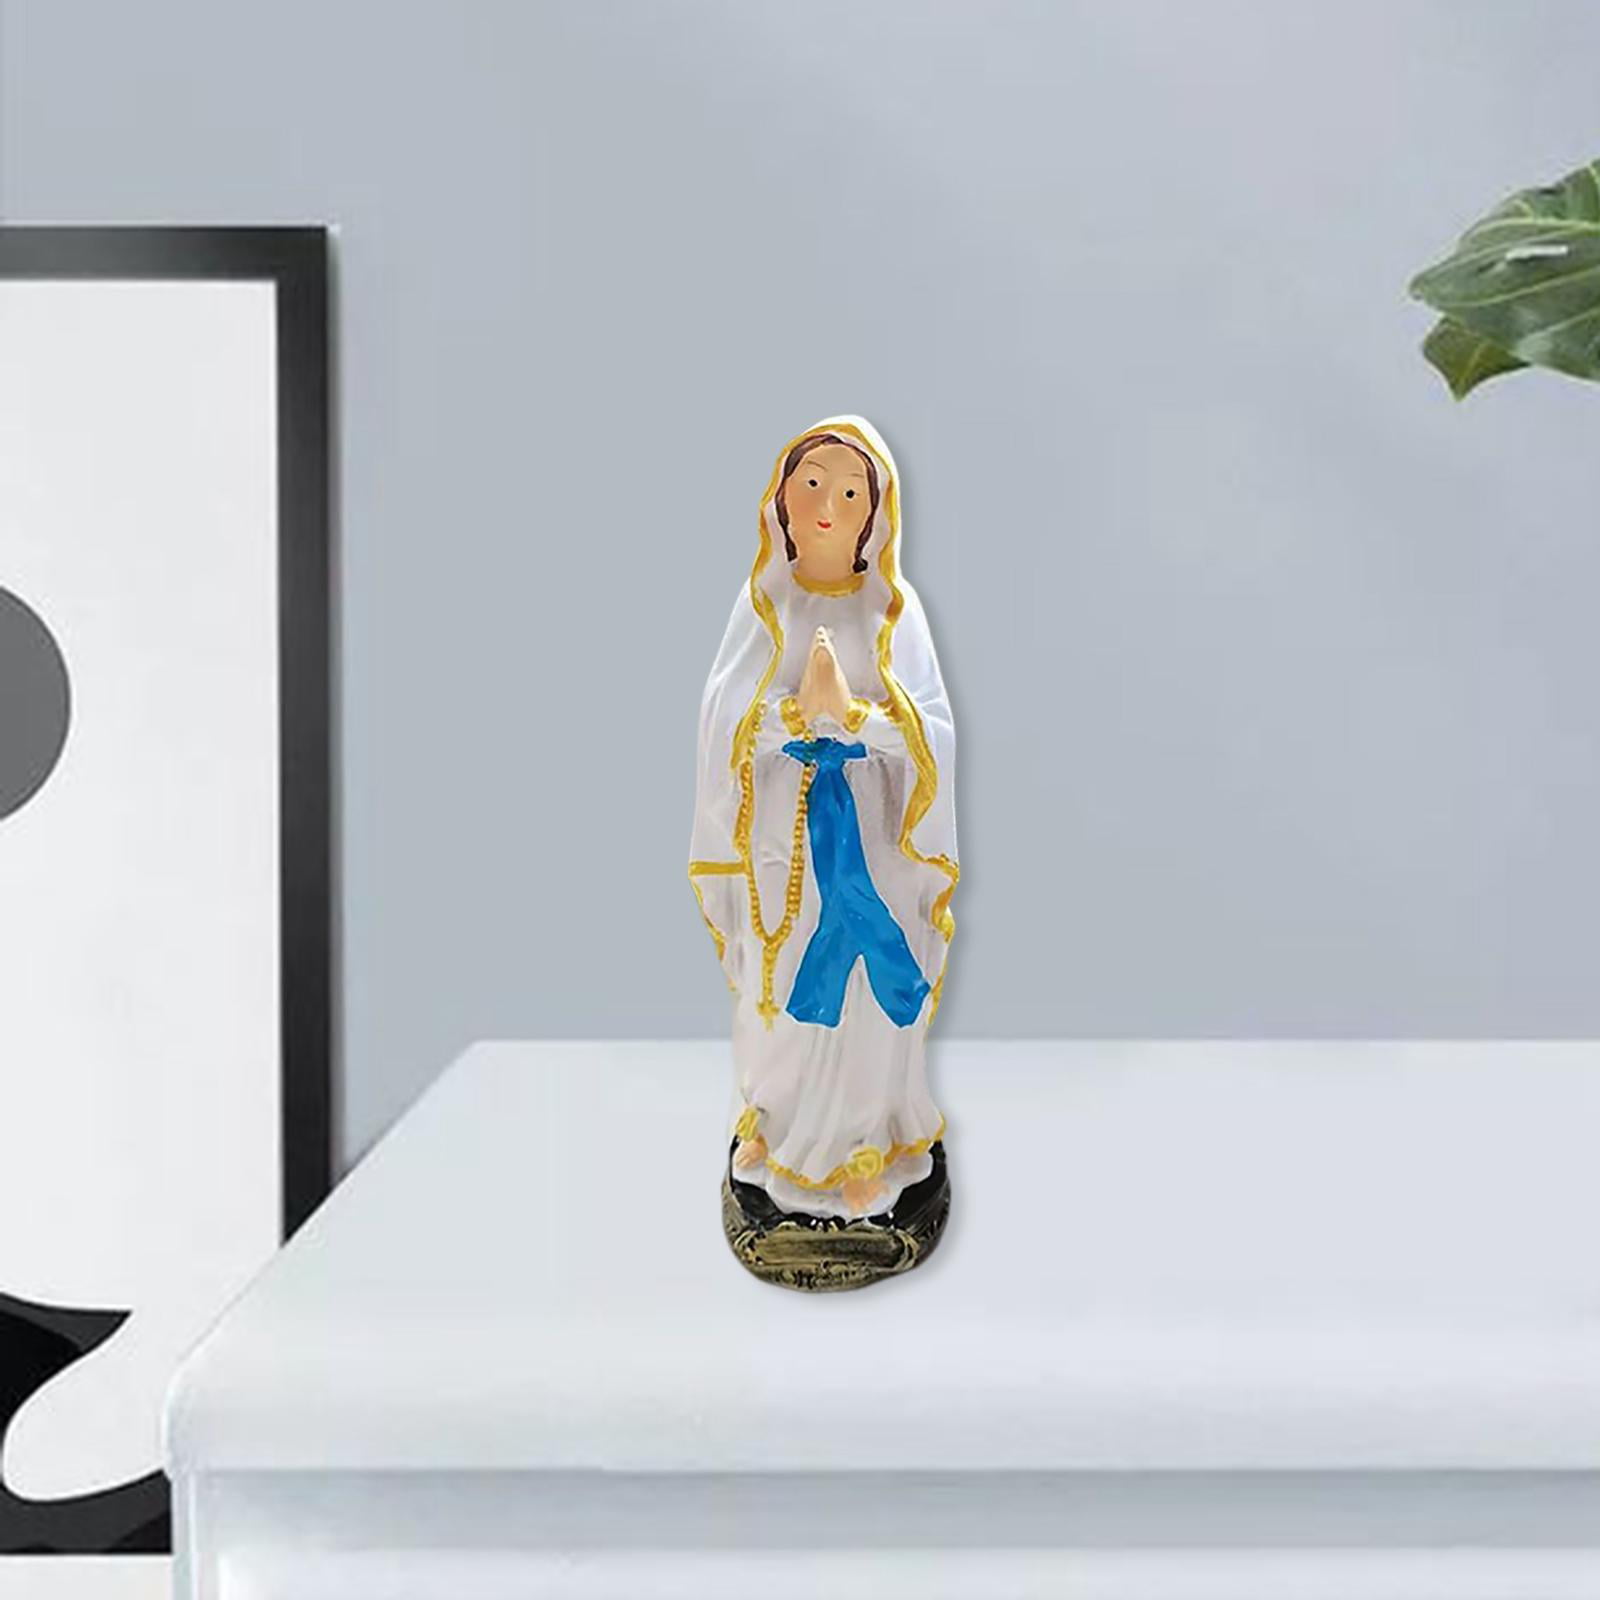 Giftgarden 11 inch Virgin Mary Statue with Baby Jesus Figurine for Catholic Home Desktop Ornaments 